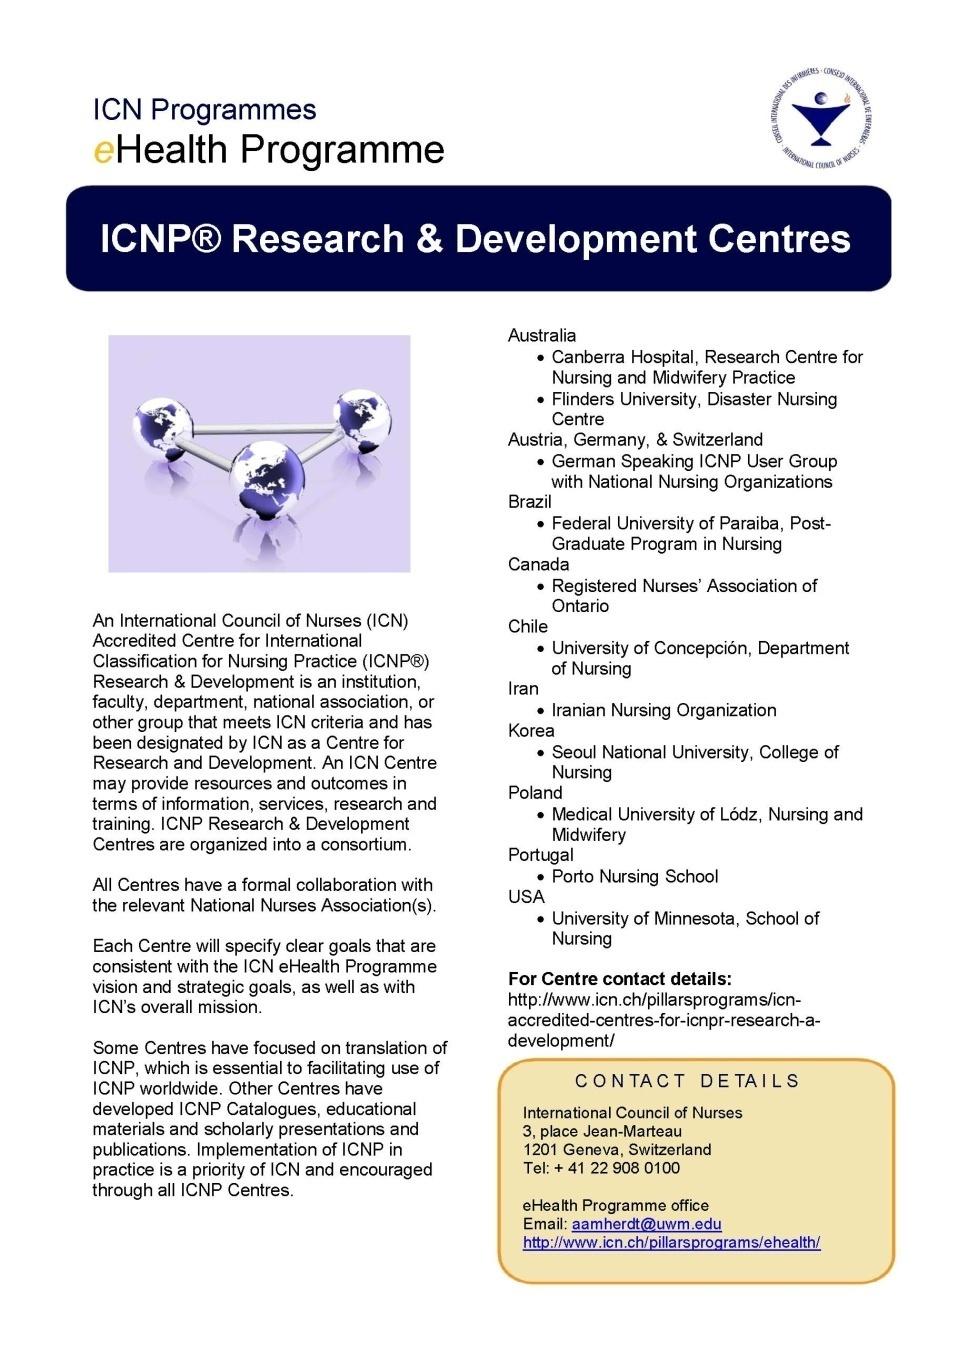 RNAO welcomed by the International Council of Nurses as: Accredited ICNP Research & Development Centre Map nursing order sets and nursing sensitive outcome measures Provide standardized nursing